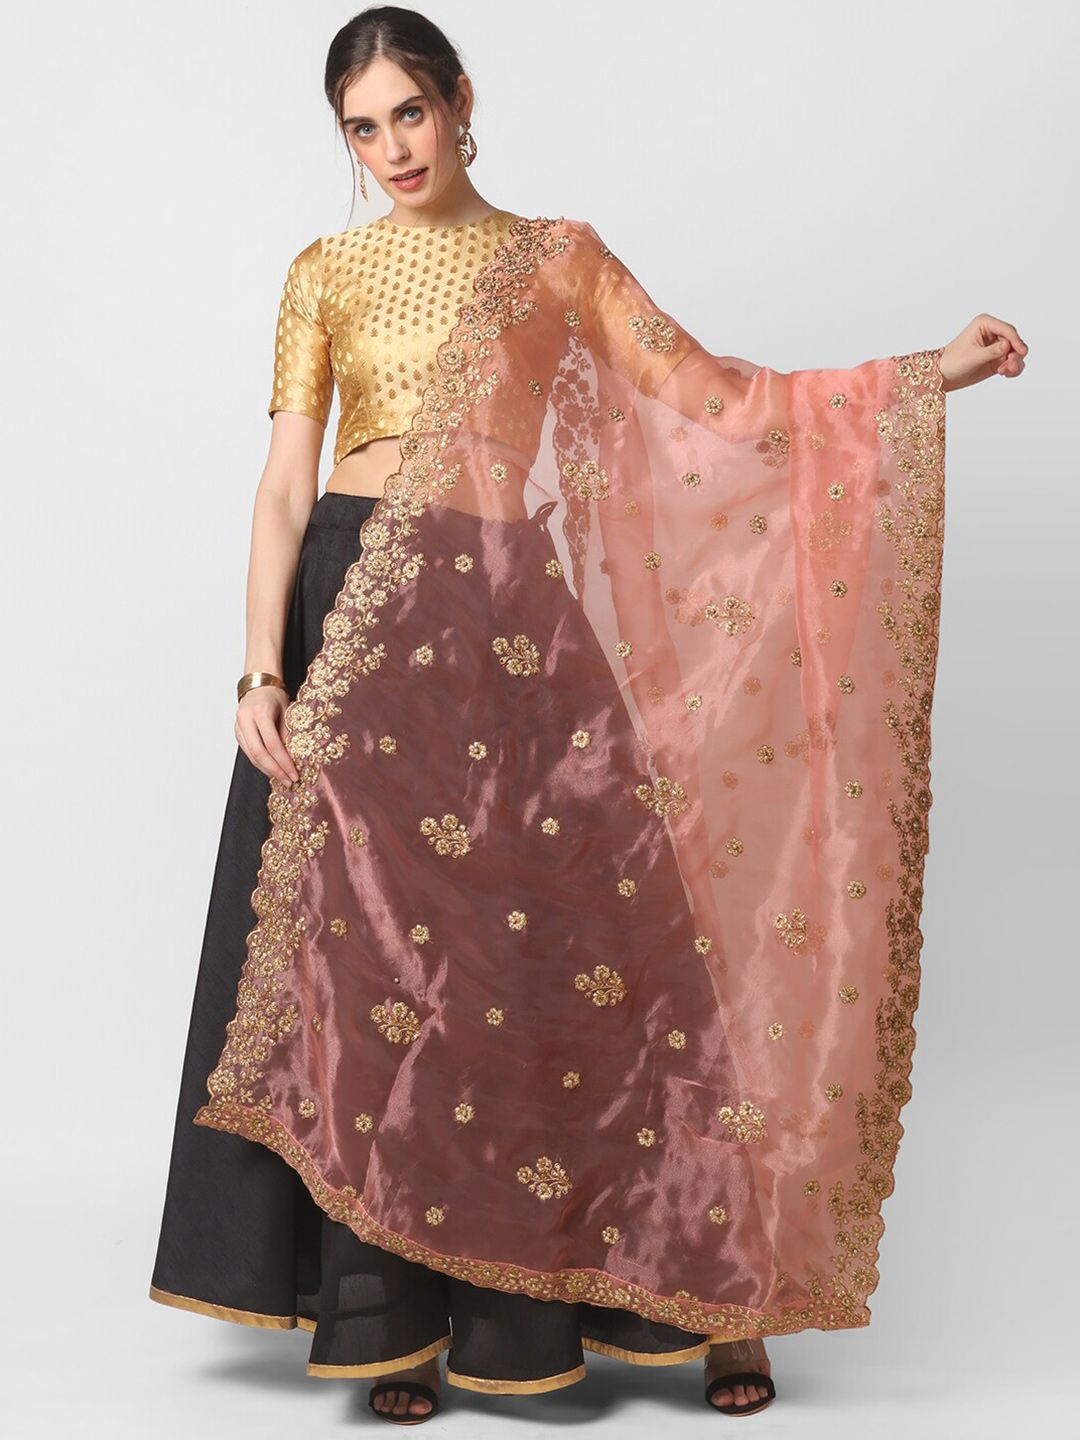 Dupatta Bazaar Peach-Coloured & Gold Embroidered Organza Dupatta with Beads and Stones Price in India